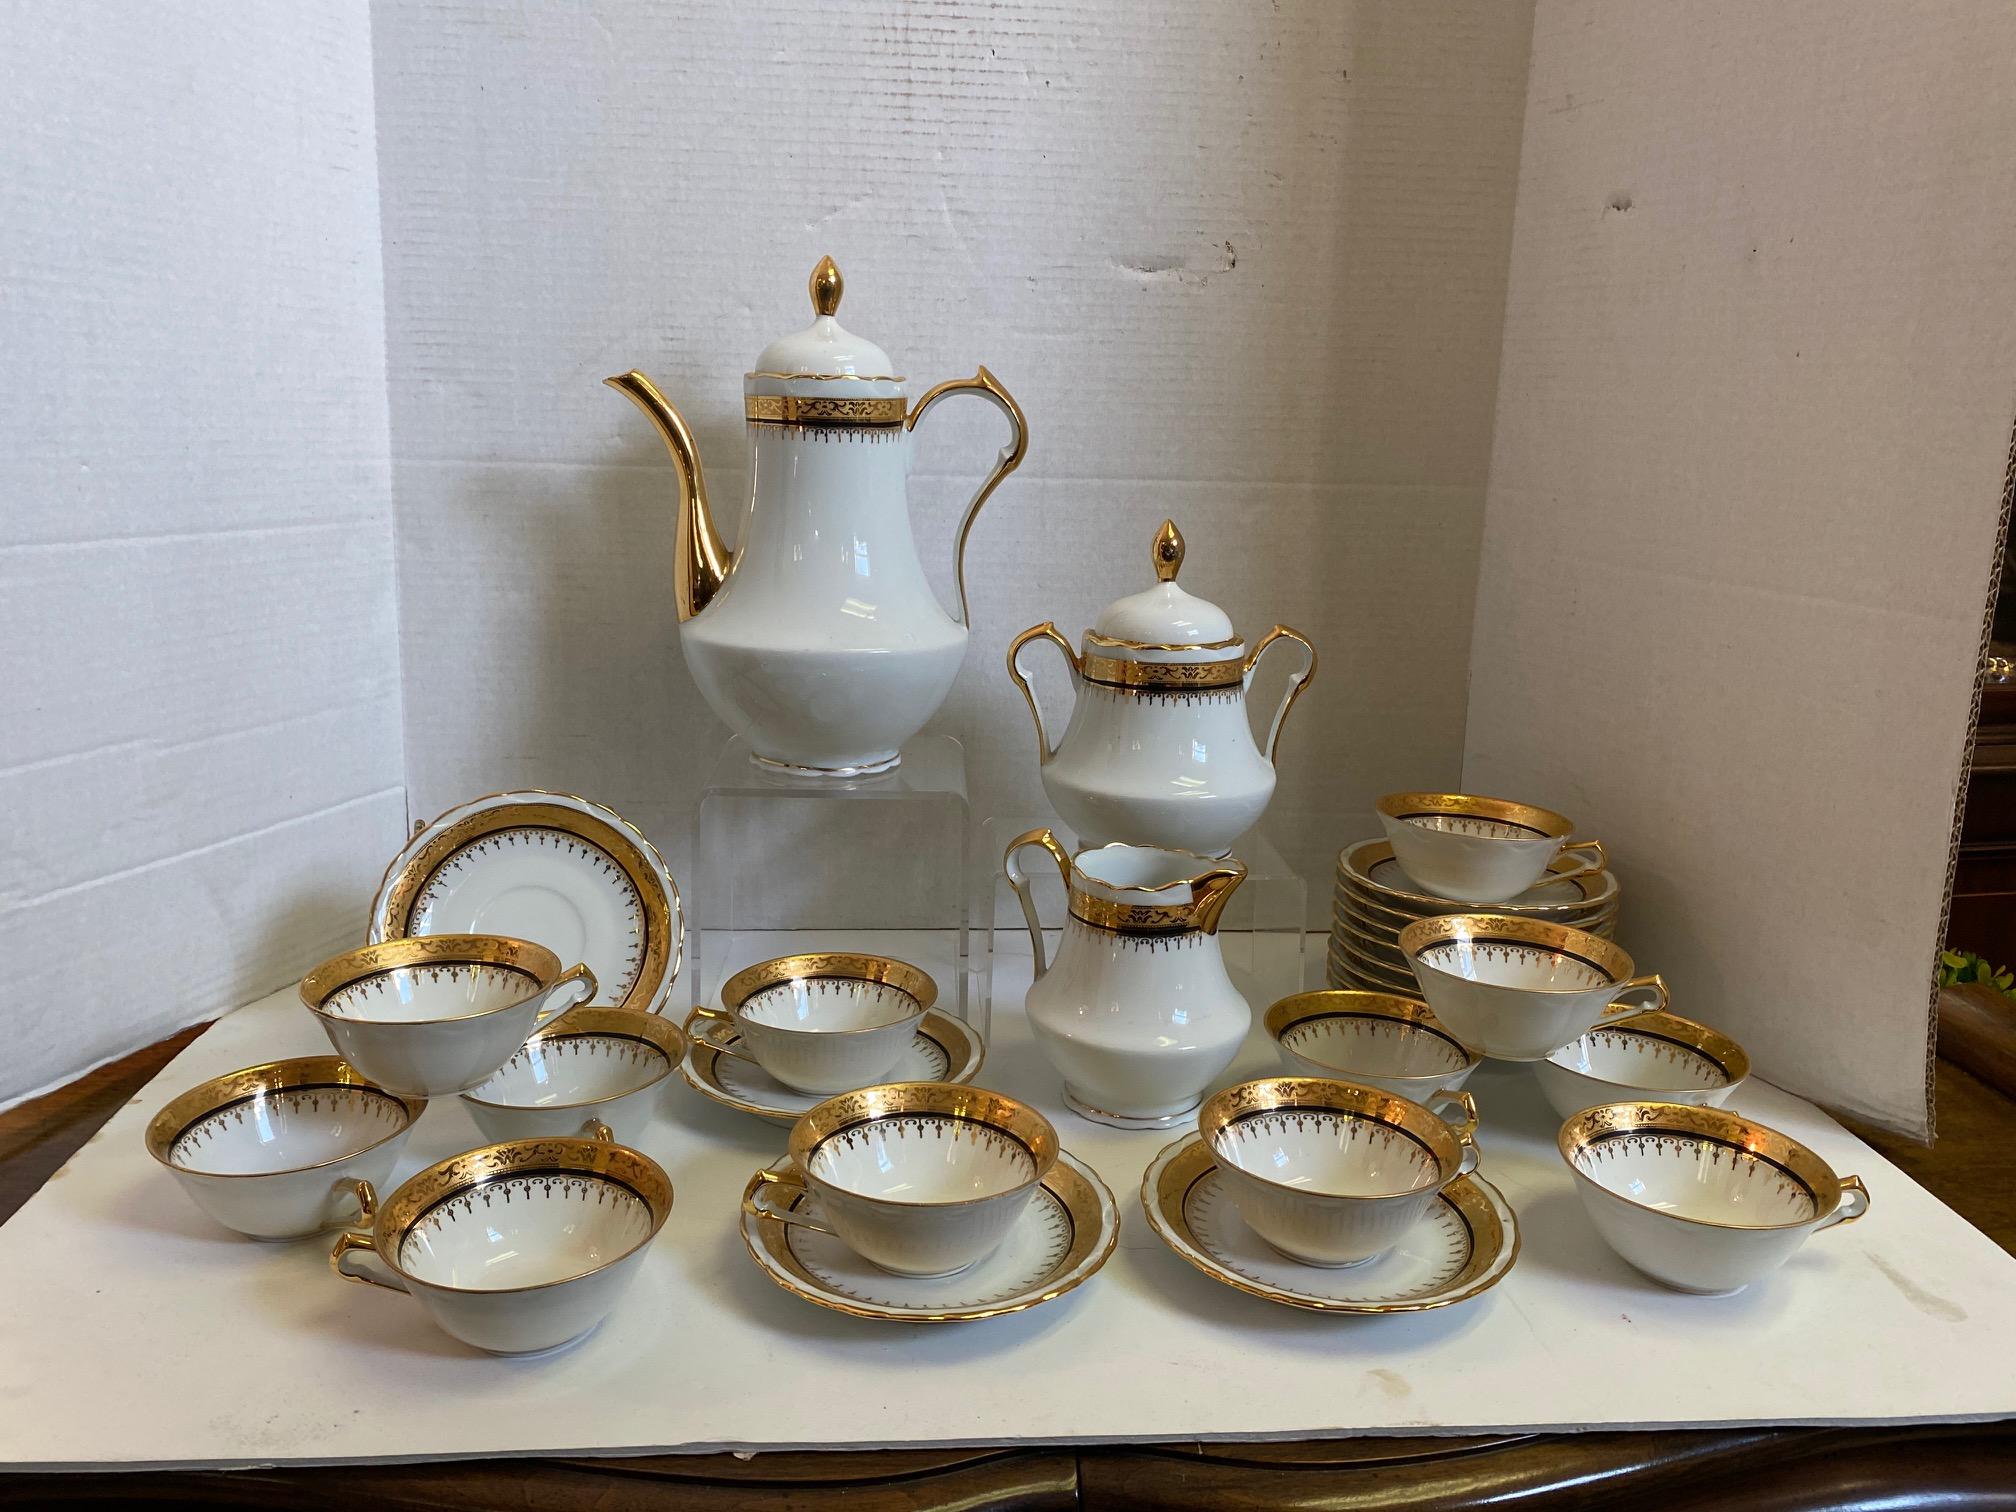 French porcelain tea set. Hand-decorated with 24-karat gold paint accented with a thin black banding. Set includes: teapot with lid, sugar bowl with lid, creamer and 12 tea cups and saucers. Painted on the bottom of each piece is, 